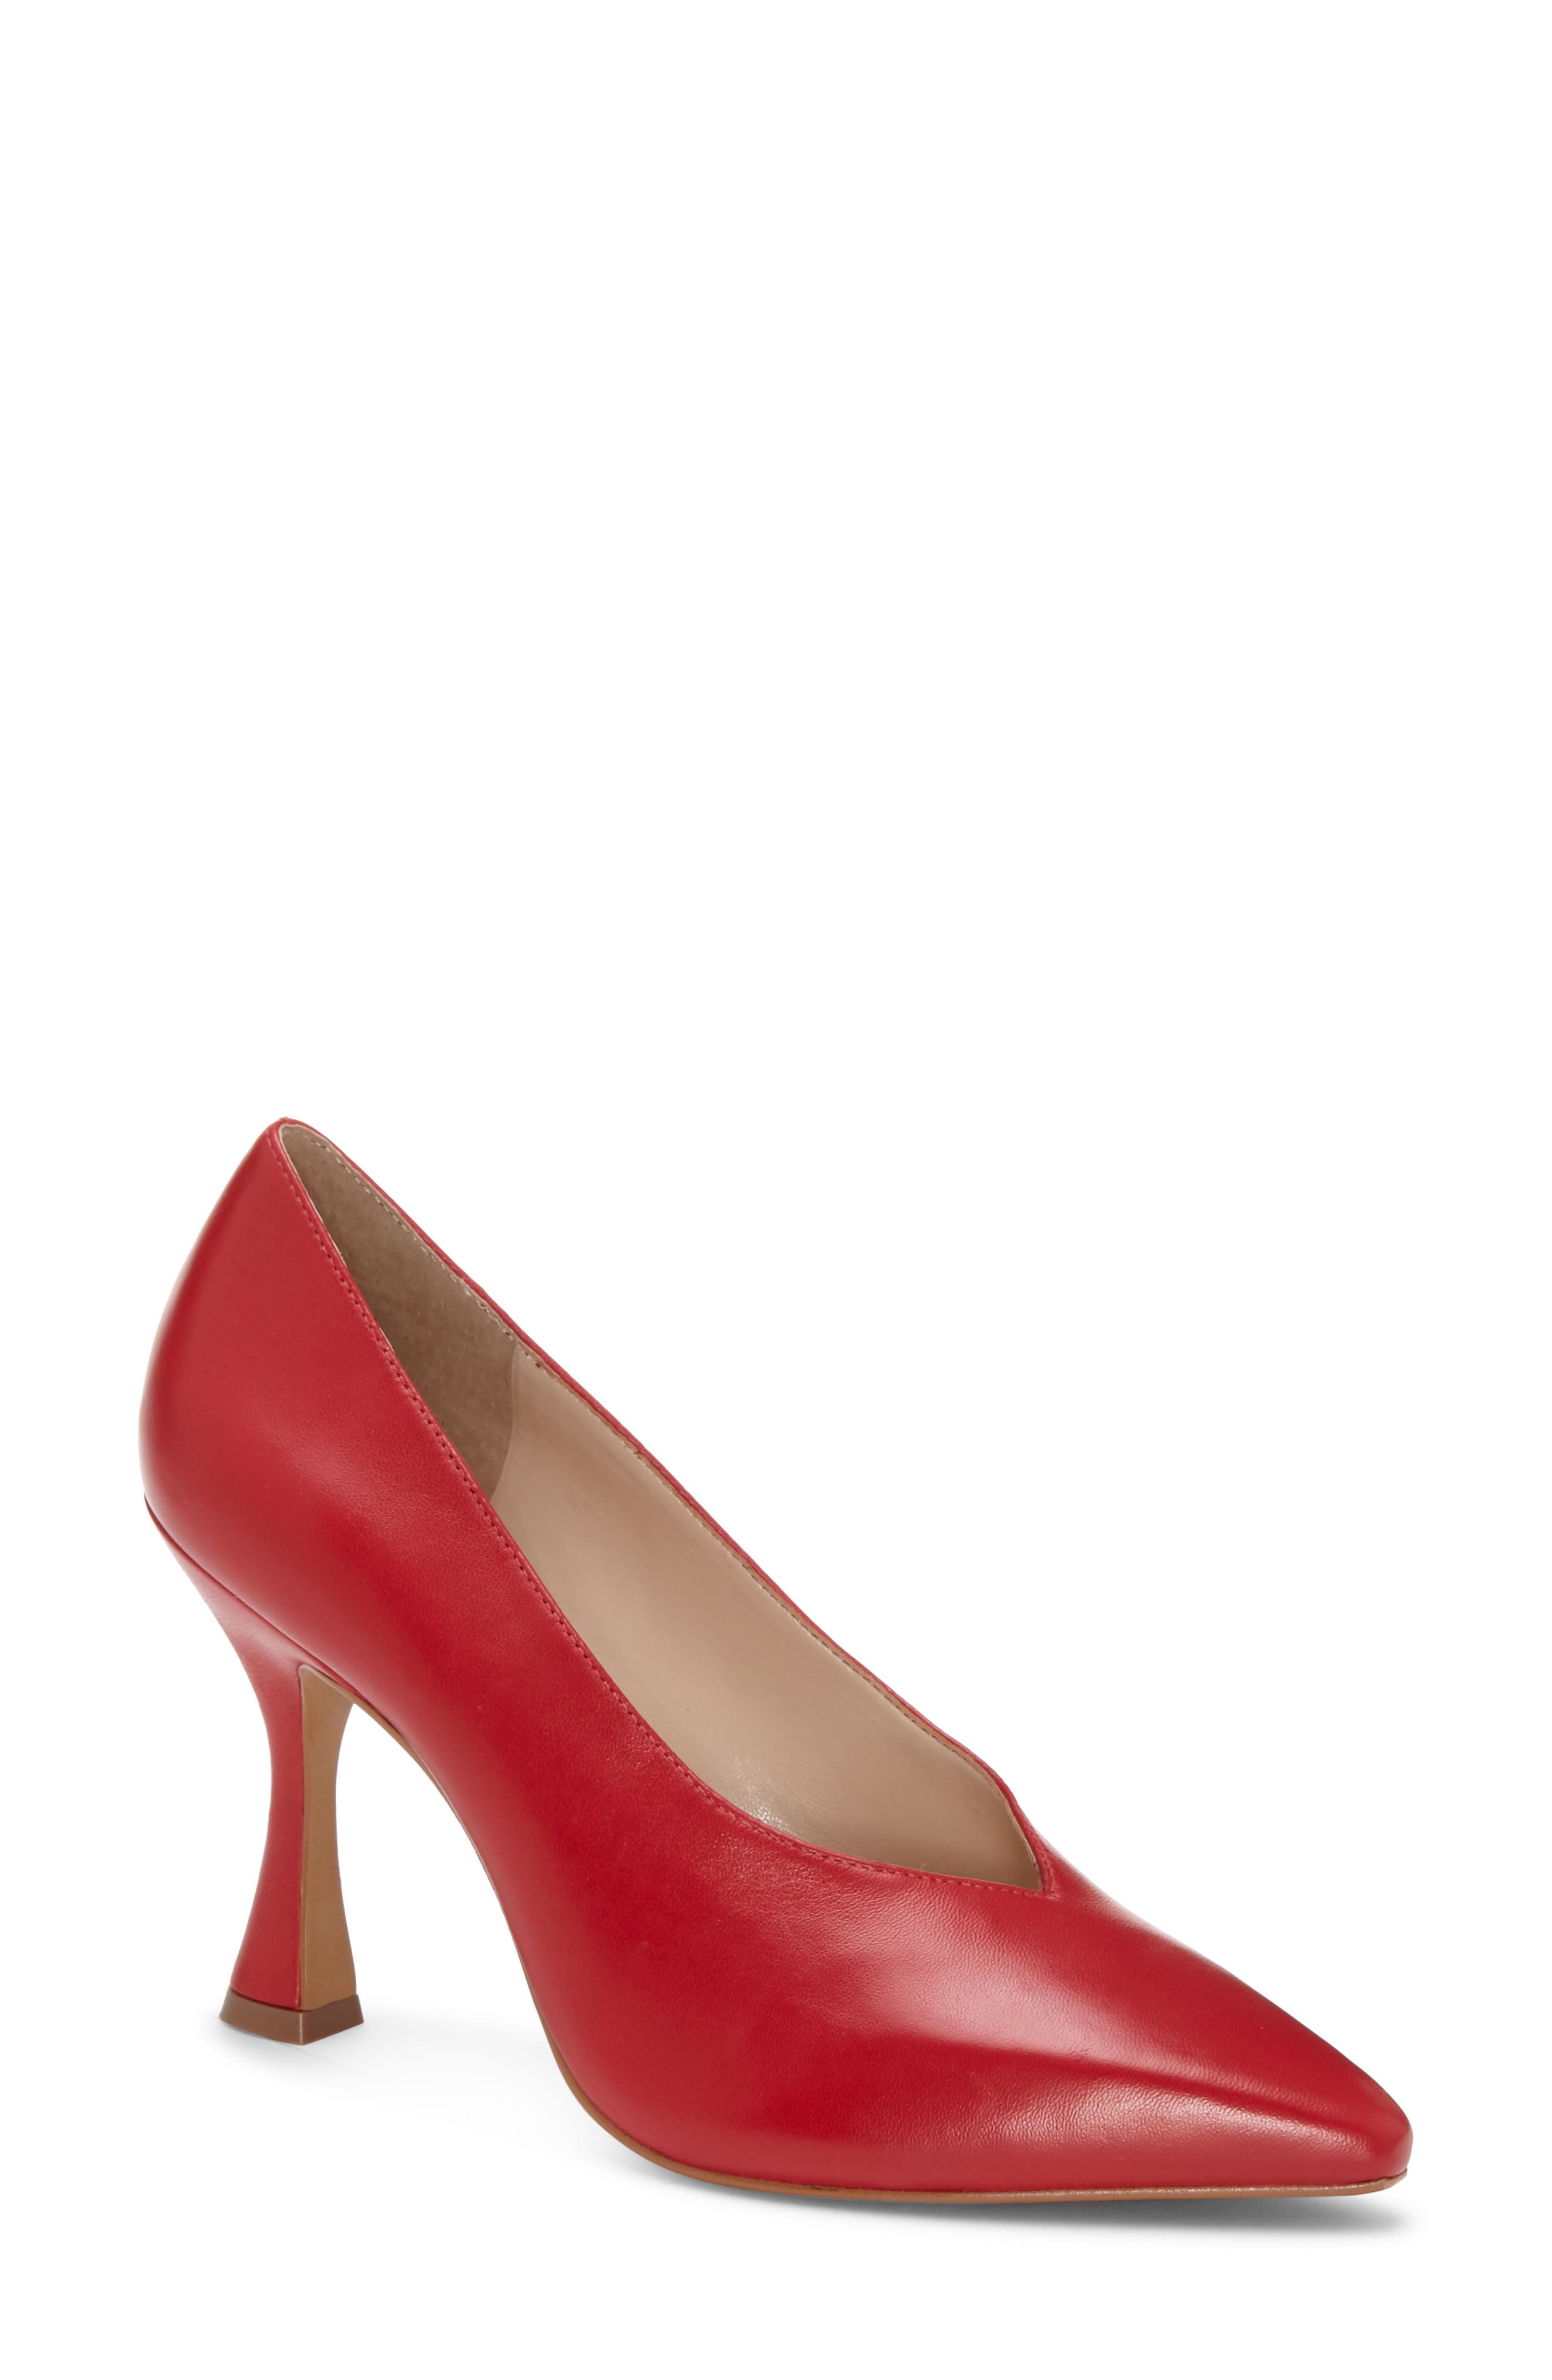 vince camuto red pumps